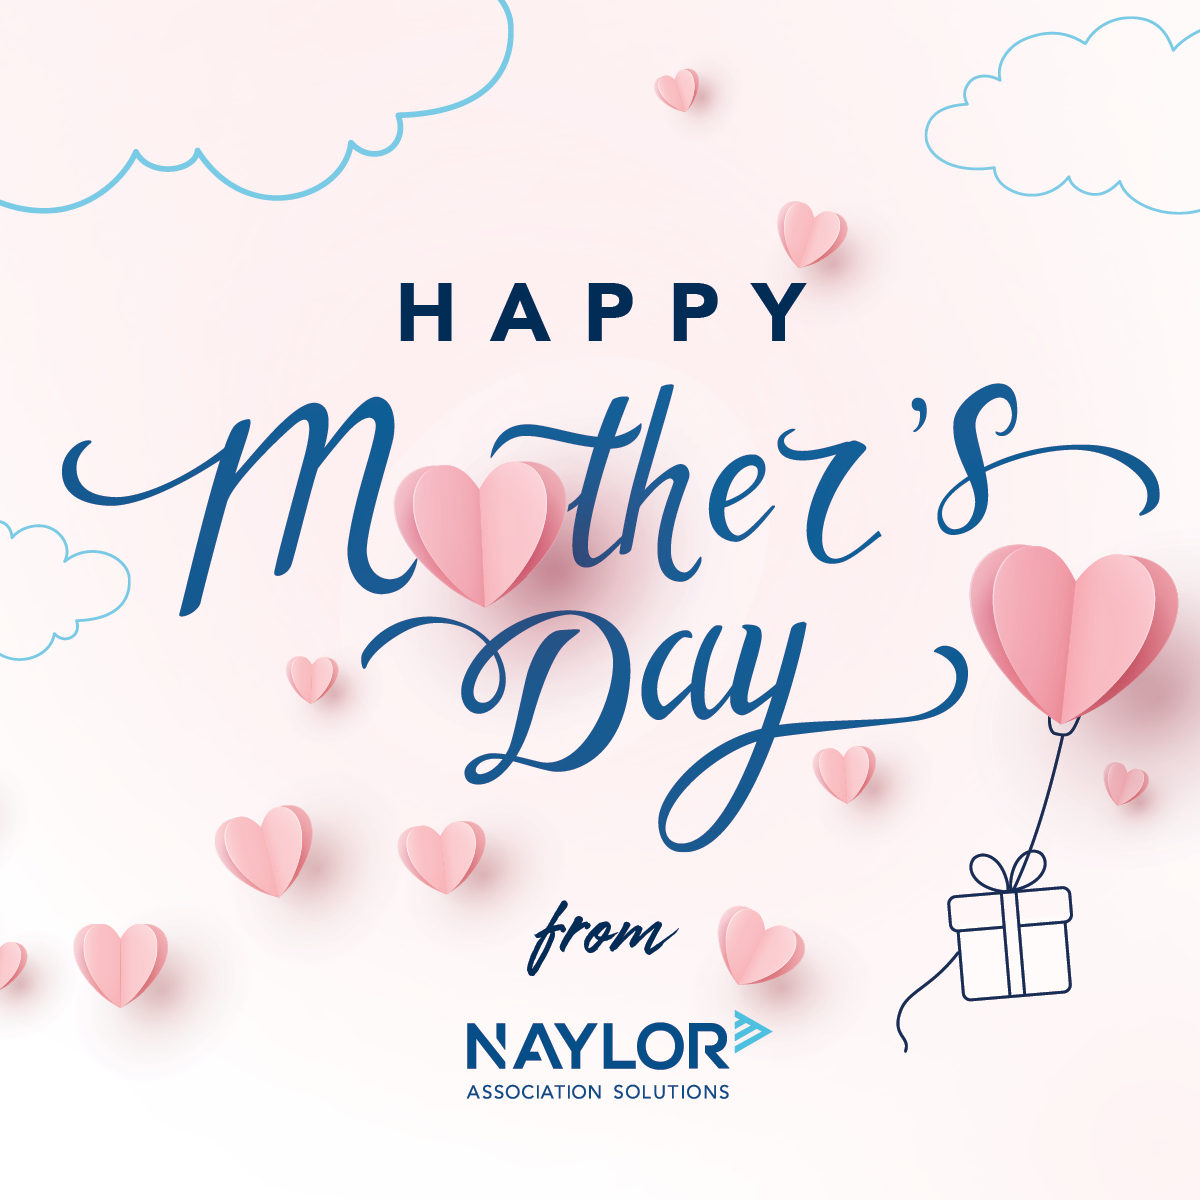 💕 Happy Mother's Day from Naylor Association Solutions 💕 Today, we celebrate the love, dedication, and strength of every mom out there. Whether you're a biological mom, adoptive mom, foster mom, work mom, a pet parent or mother figure, your impact is immeasurable.